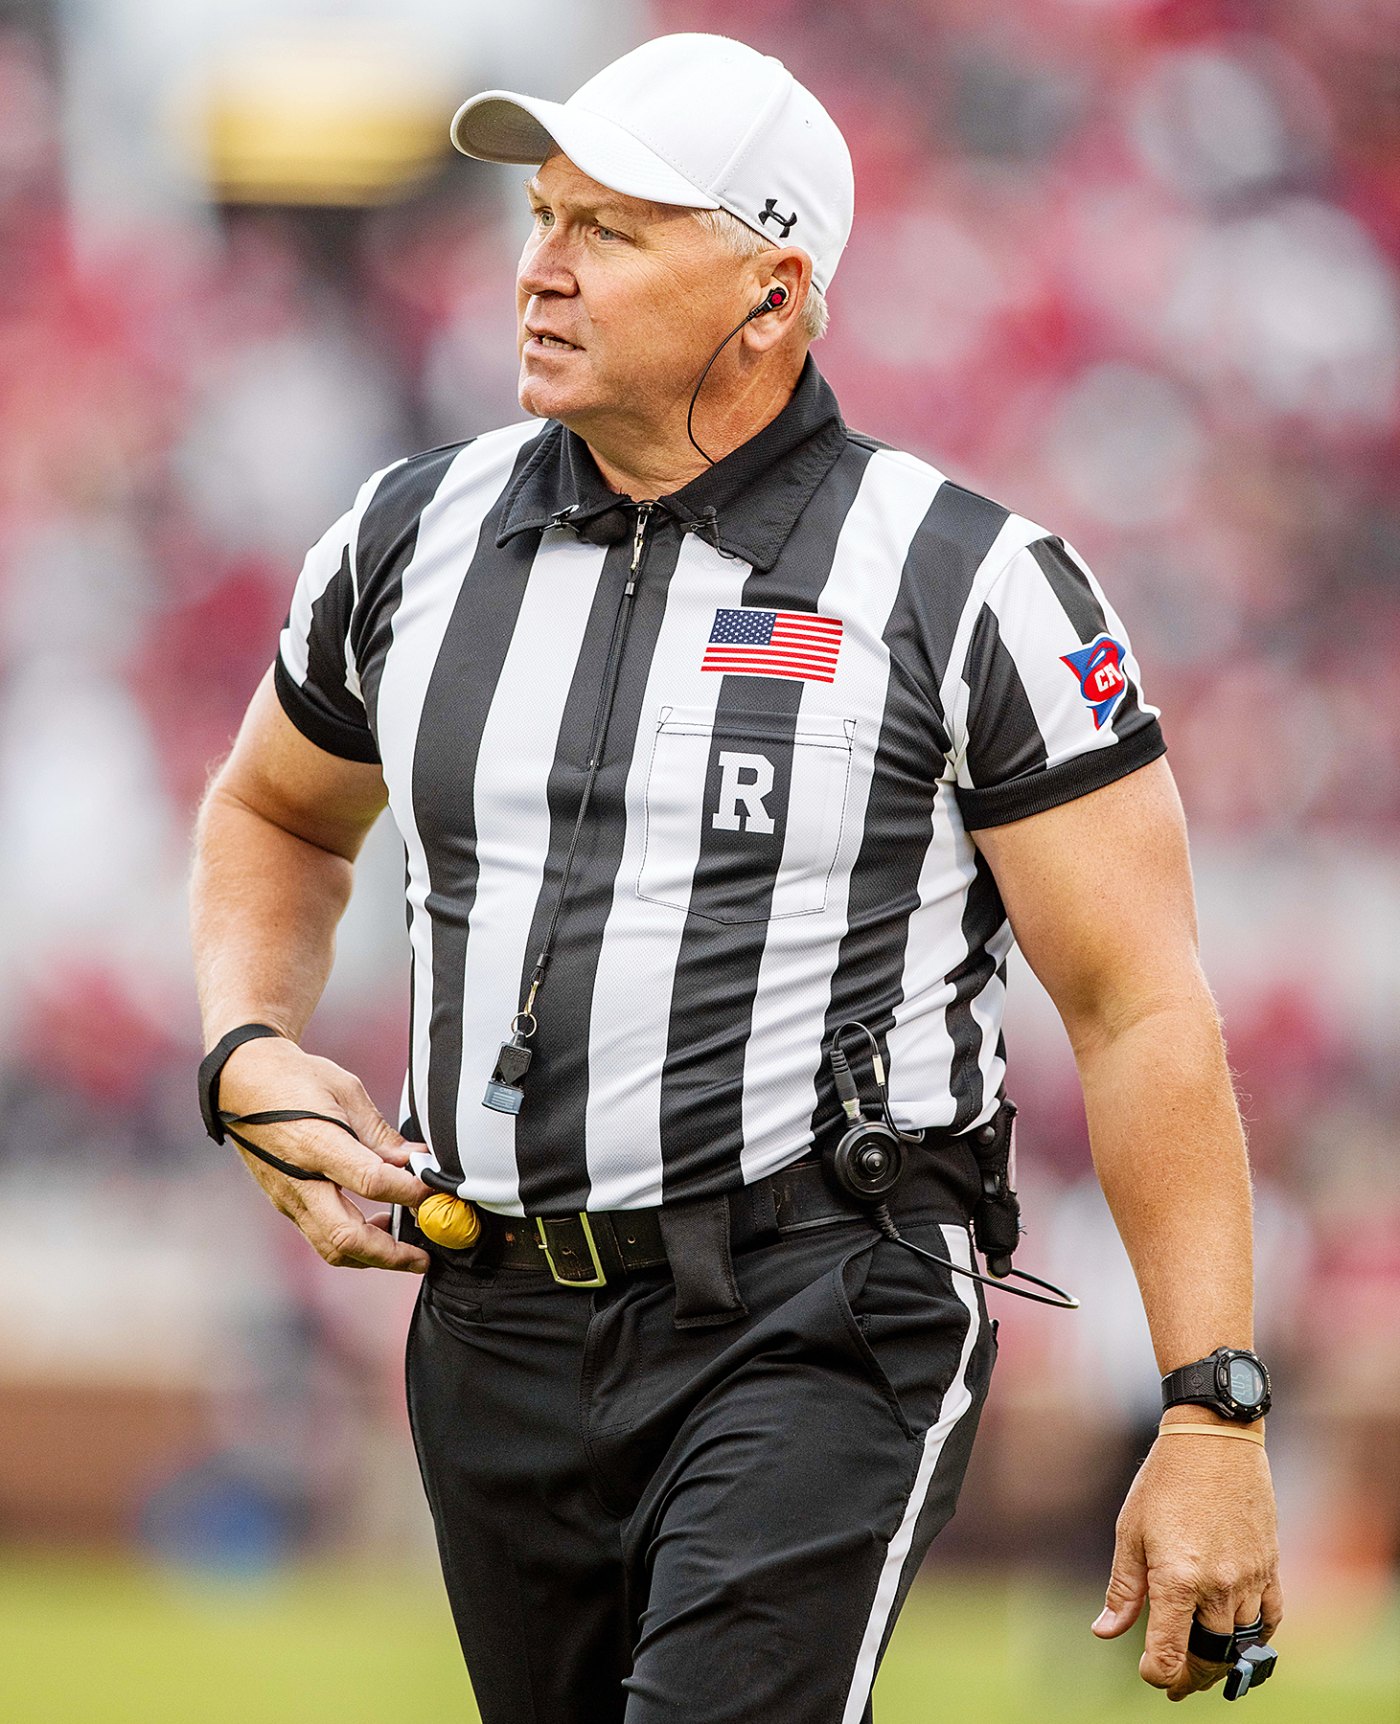 This College Football Referee With Superbuff Arms Was the Real Star of the National Championship Game: Meet Mike Defee